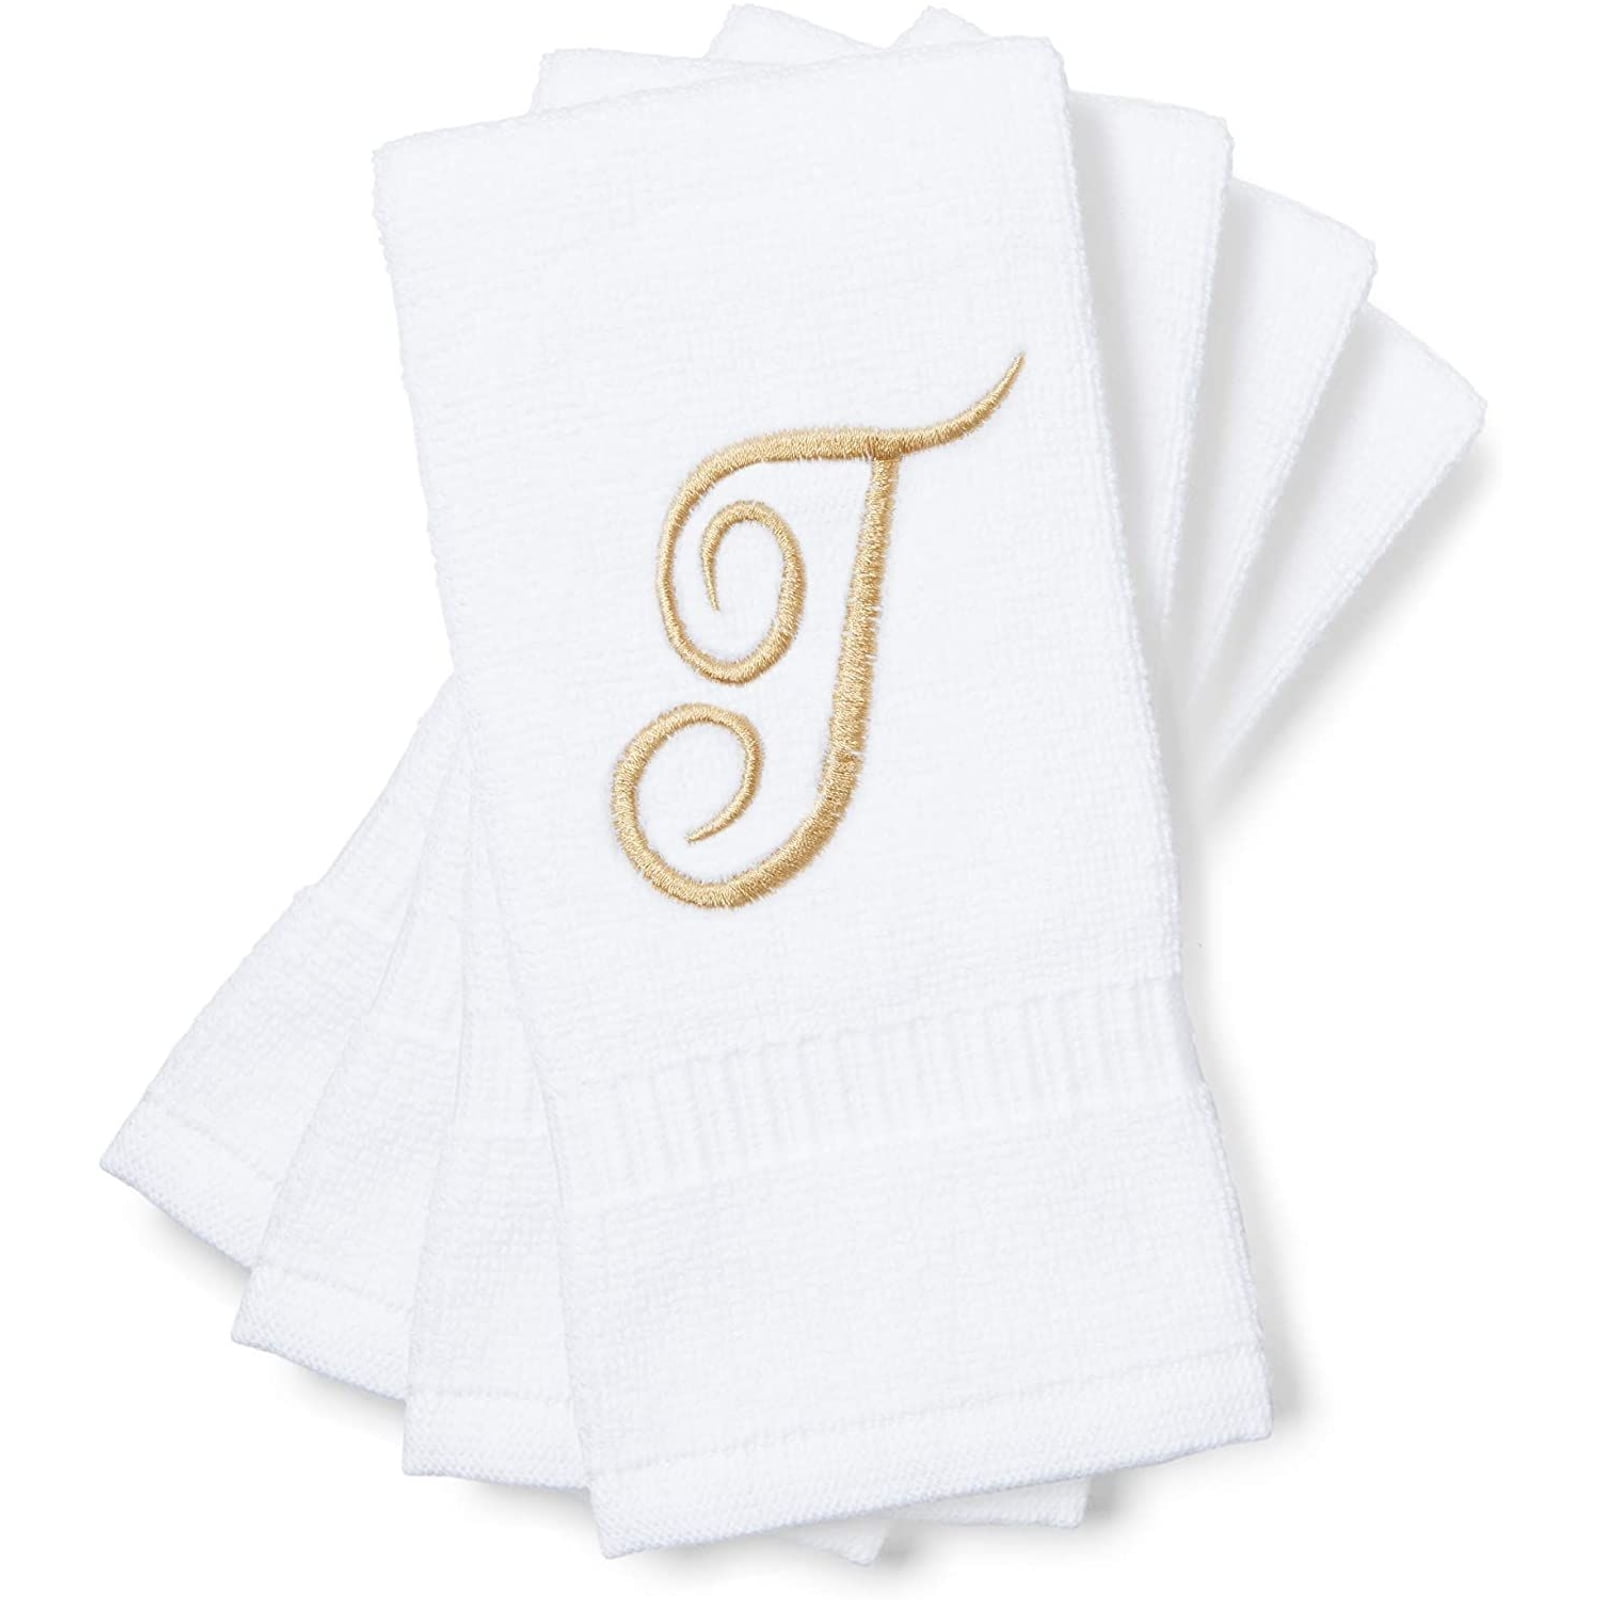 Embroidered Letter N Monogrammed Fingertip Towels 11 x 18 in, White, Set of 4